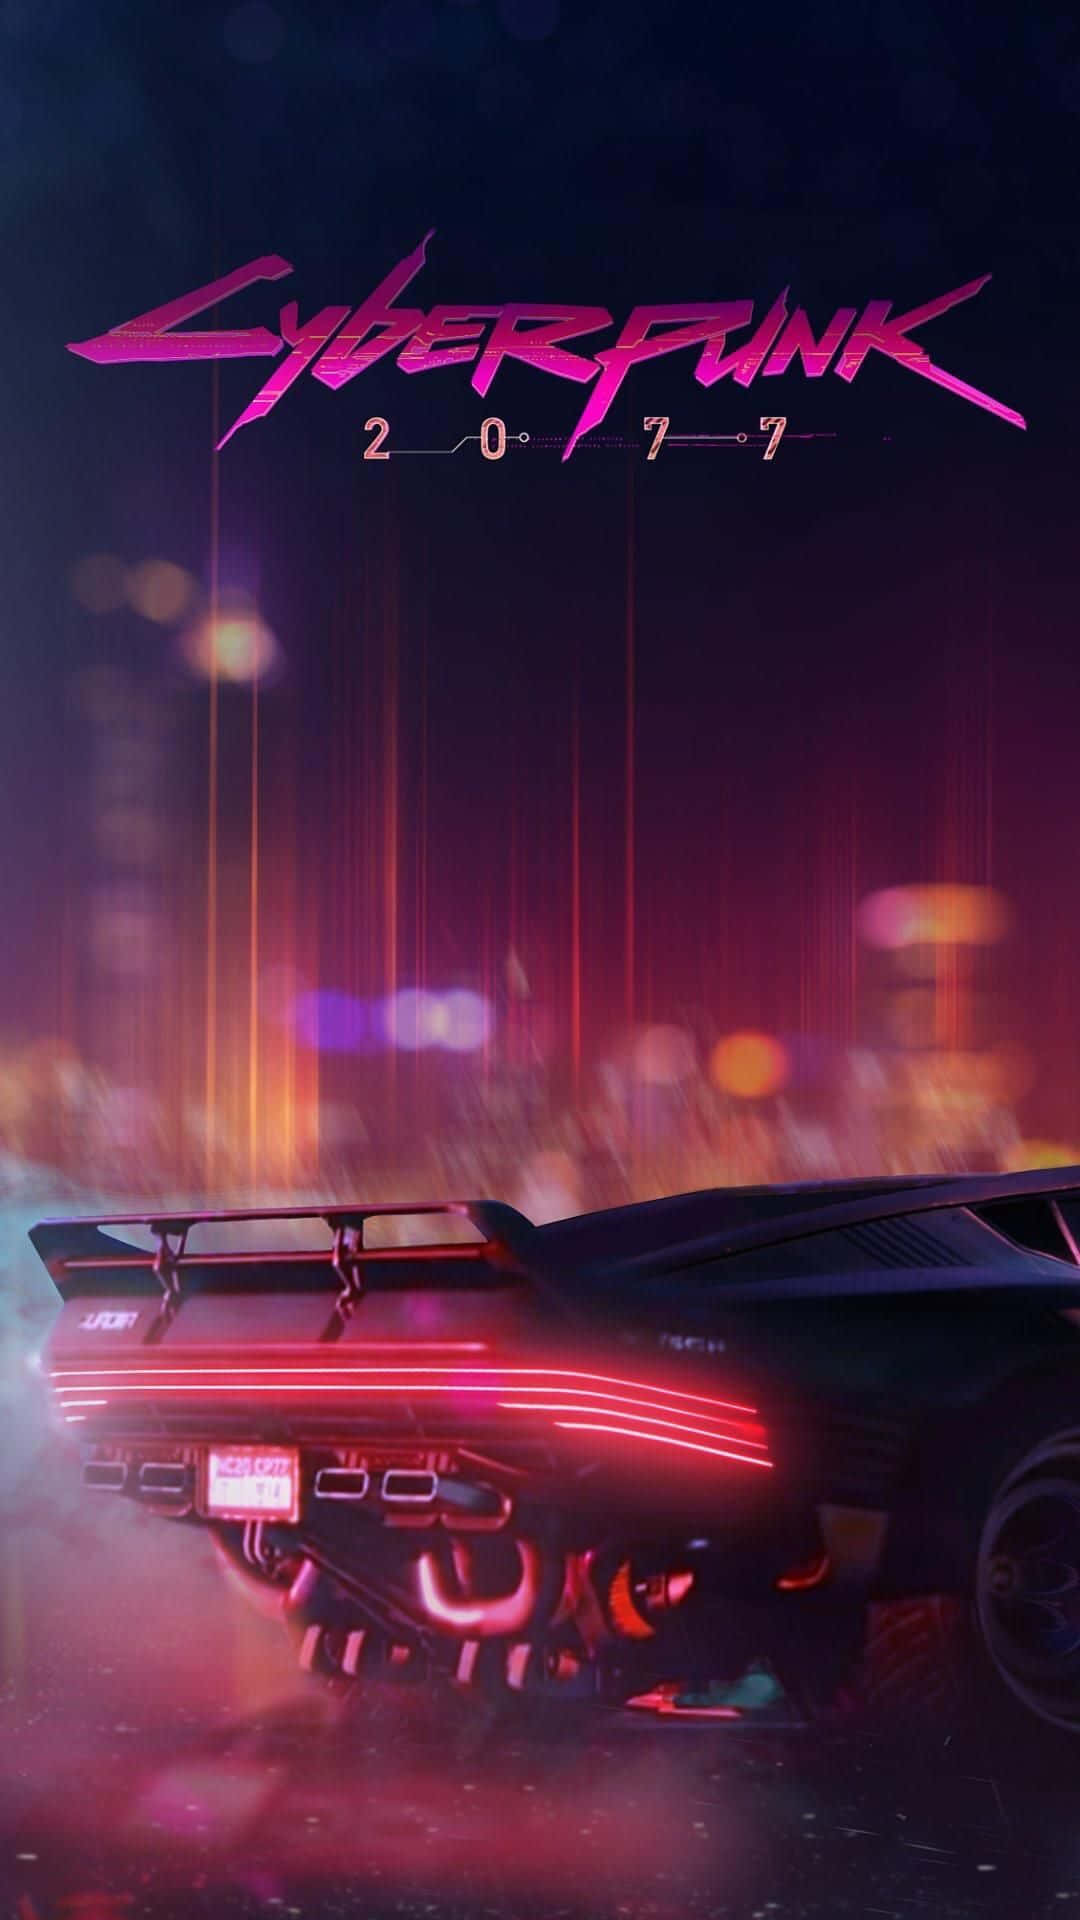 Cyberpunk 2077 styled and optimized for Pixel 3xl